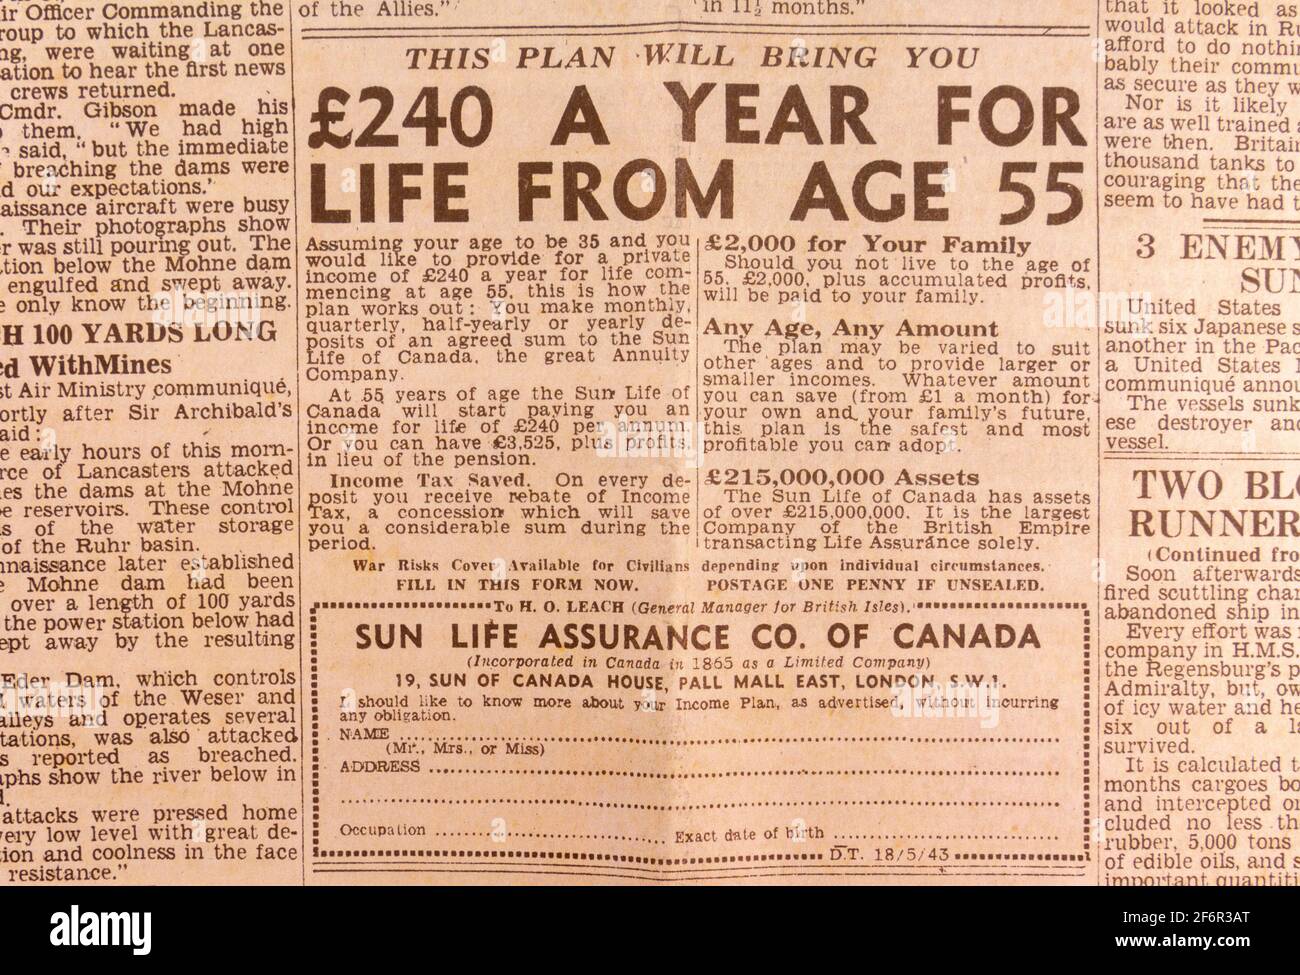 Advert for Sun Life Assurance Company of Canada in the Daily Telegraph (replica), 18th May 1943, the day after the Dam Busters raid. Stock Photo